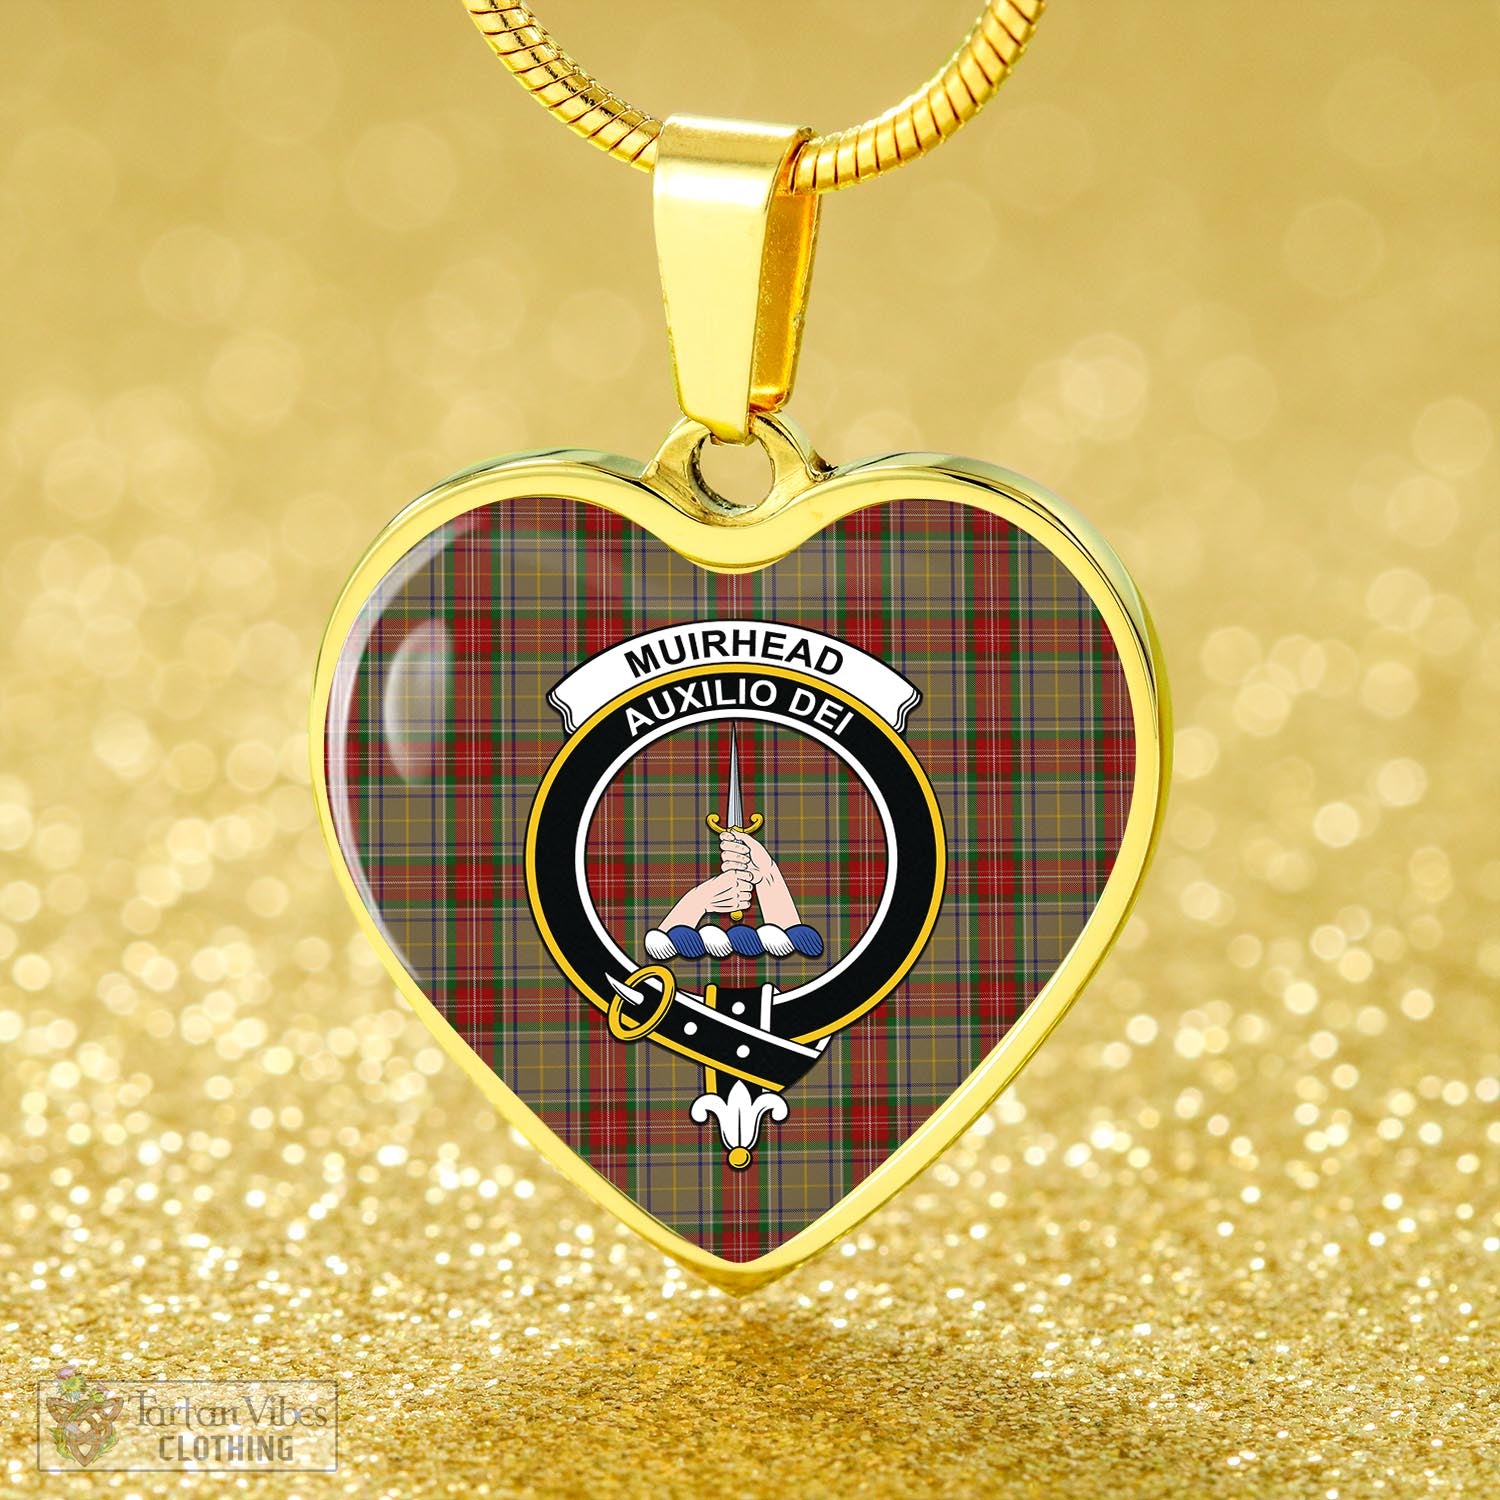 Tartan Vibes Clothing Muirhead Old Tartan Heart Necklace with Family Crest